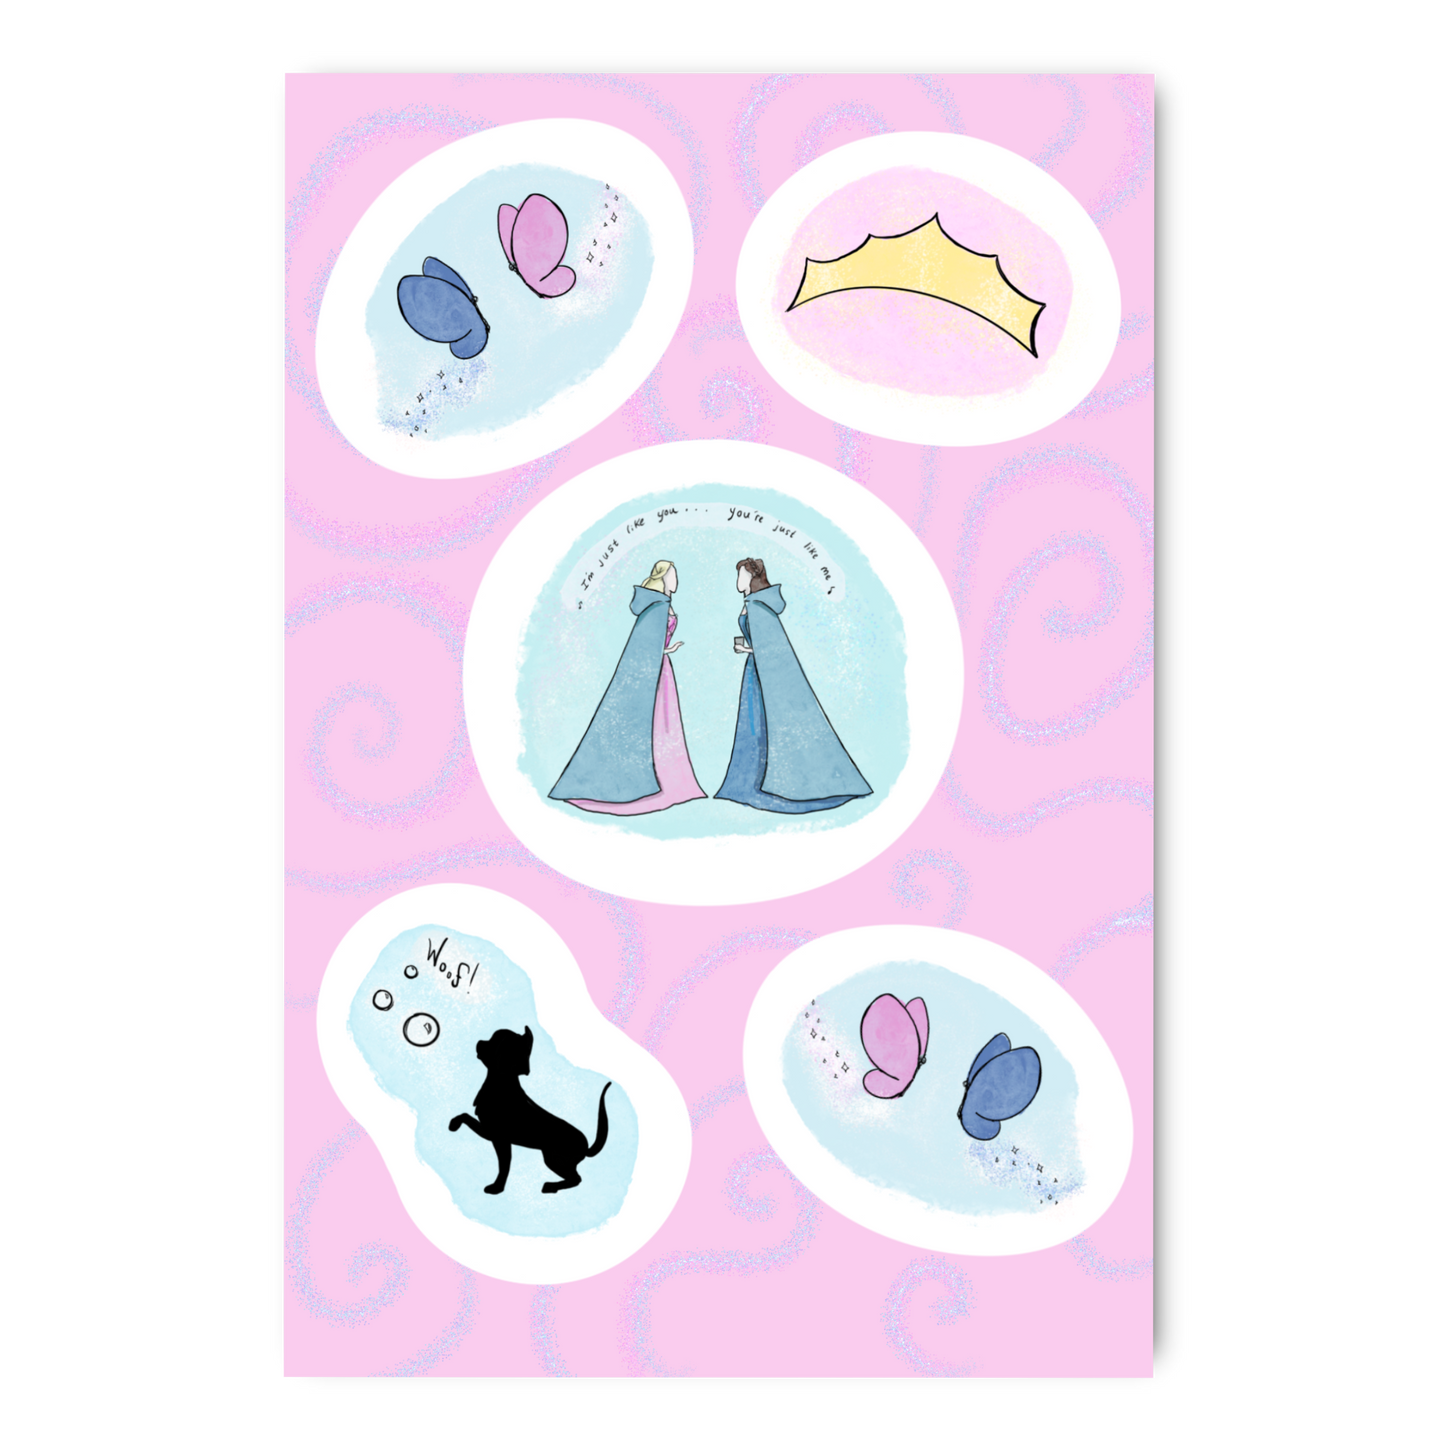 Barbie Princess and the Pauper inspired Sticker Sheet